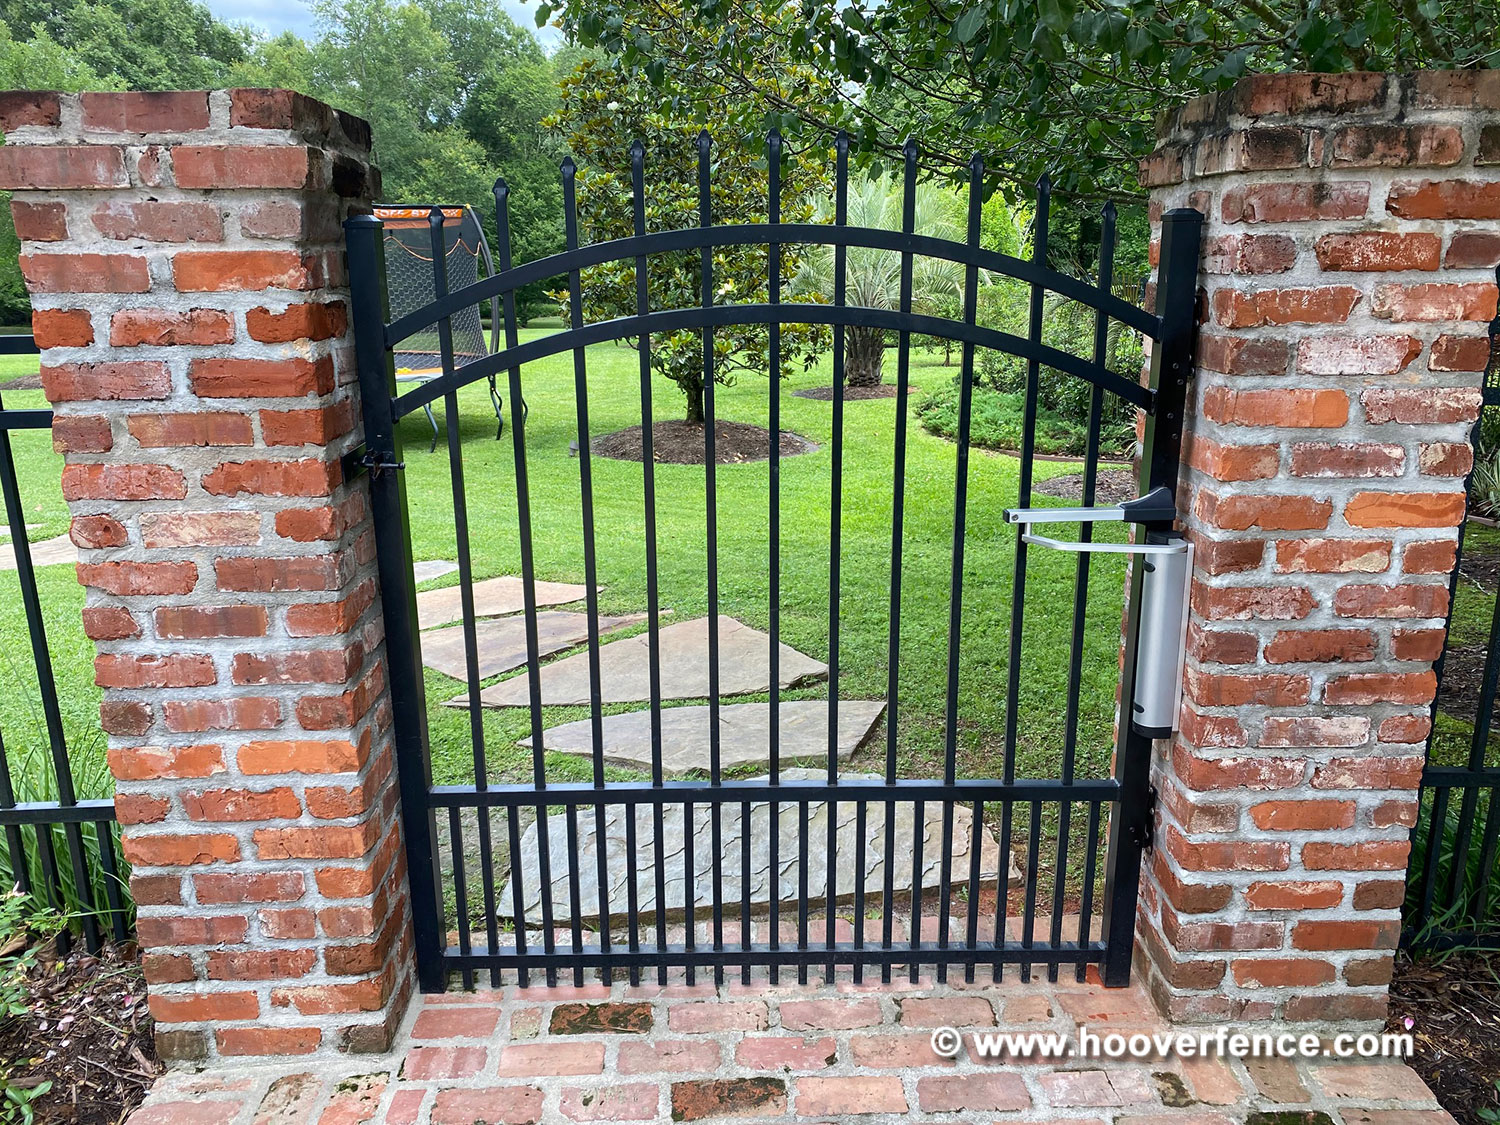 Customer Install - Locinox Verticlose-2-Wall Installed on Arched Metal Gate Mounted on Red Brick Columns - Baton Rouge, LA